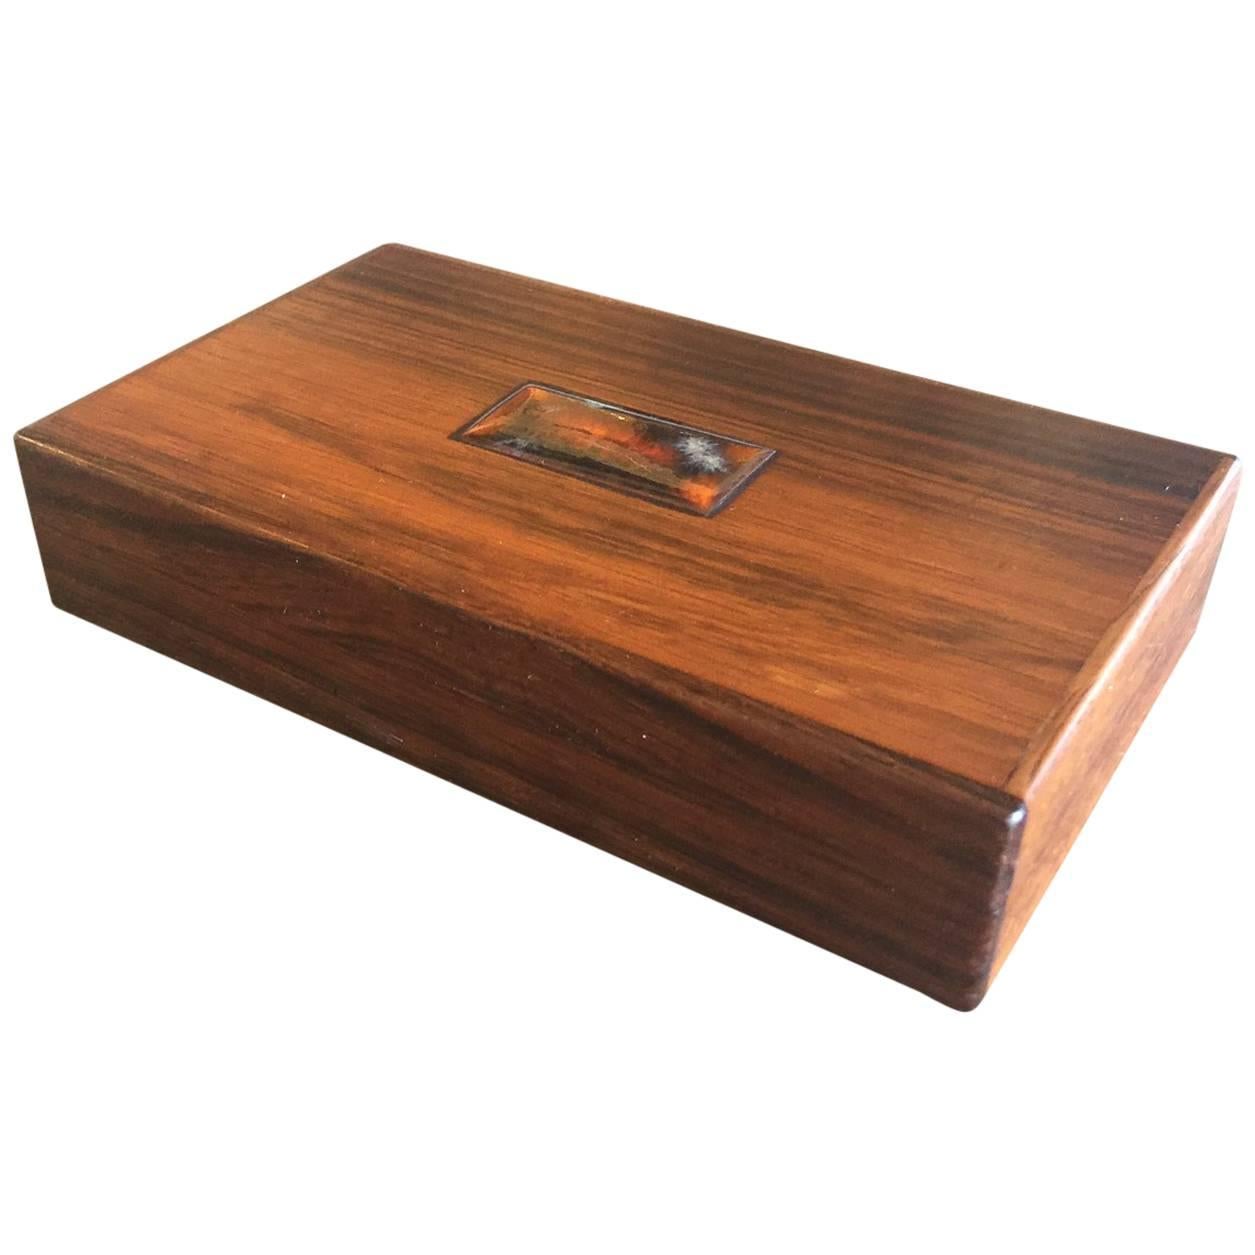 Bodil Eje Danish Rosewood Box / Humidor by Alfred Klitgaard For Sale